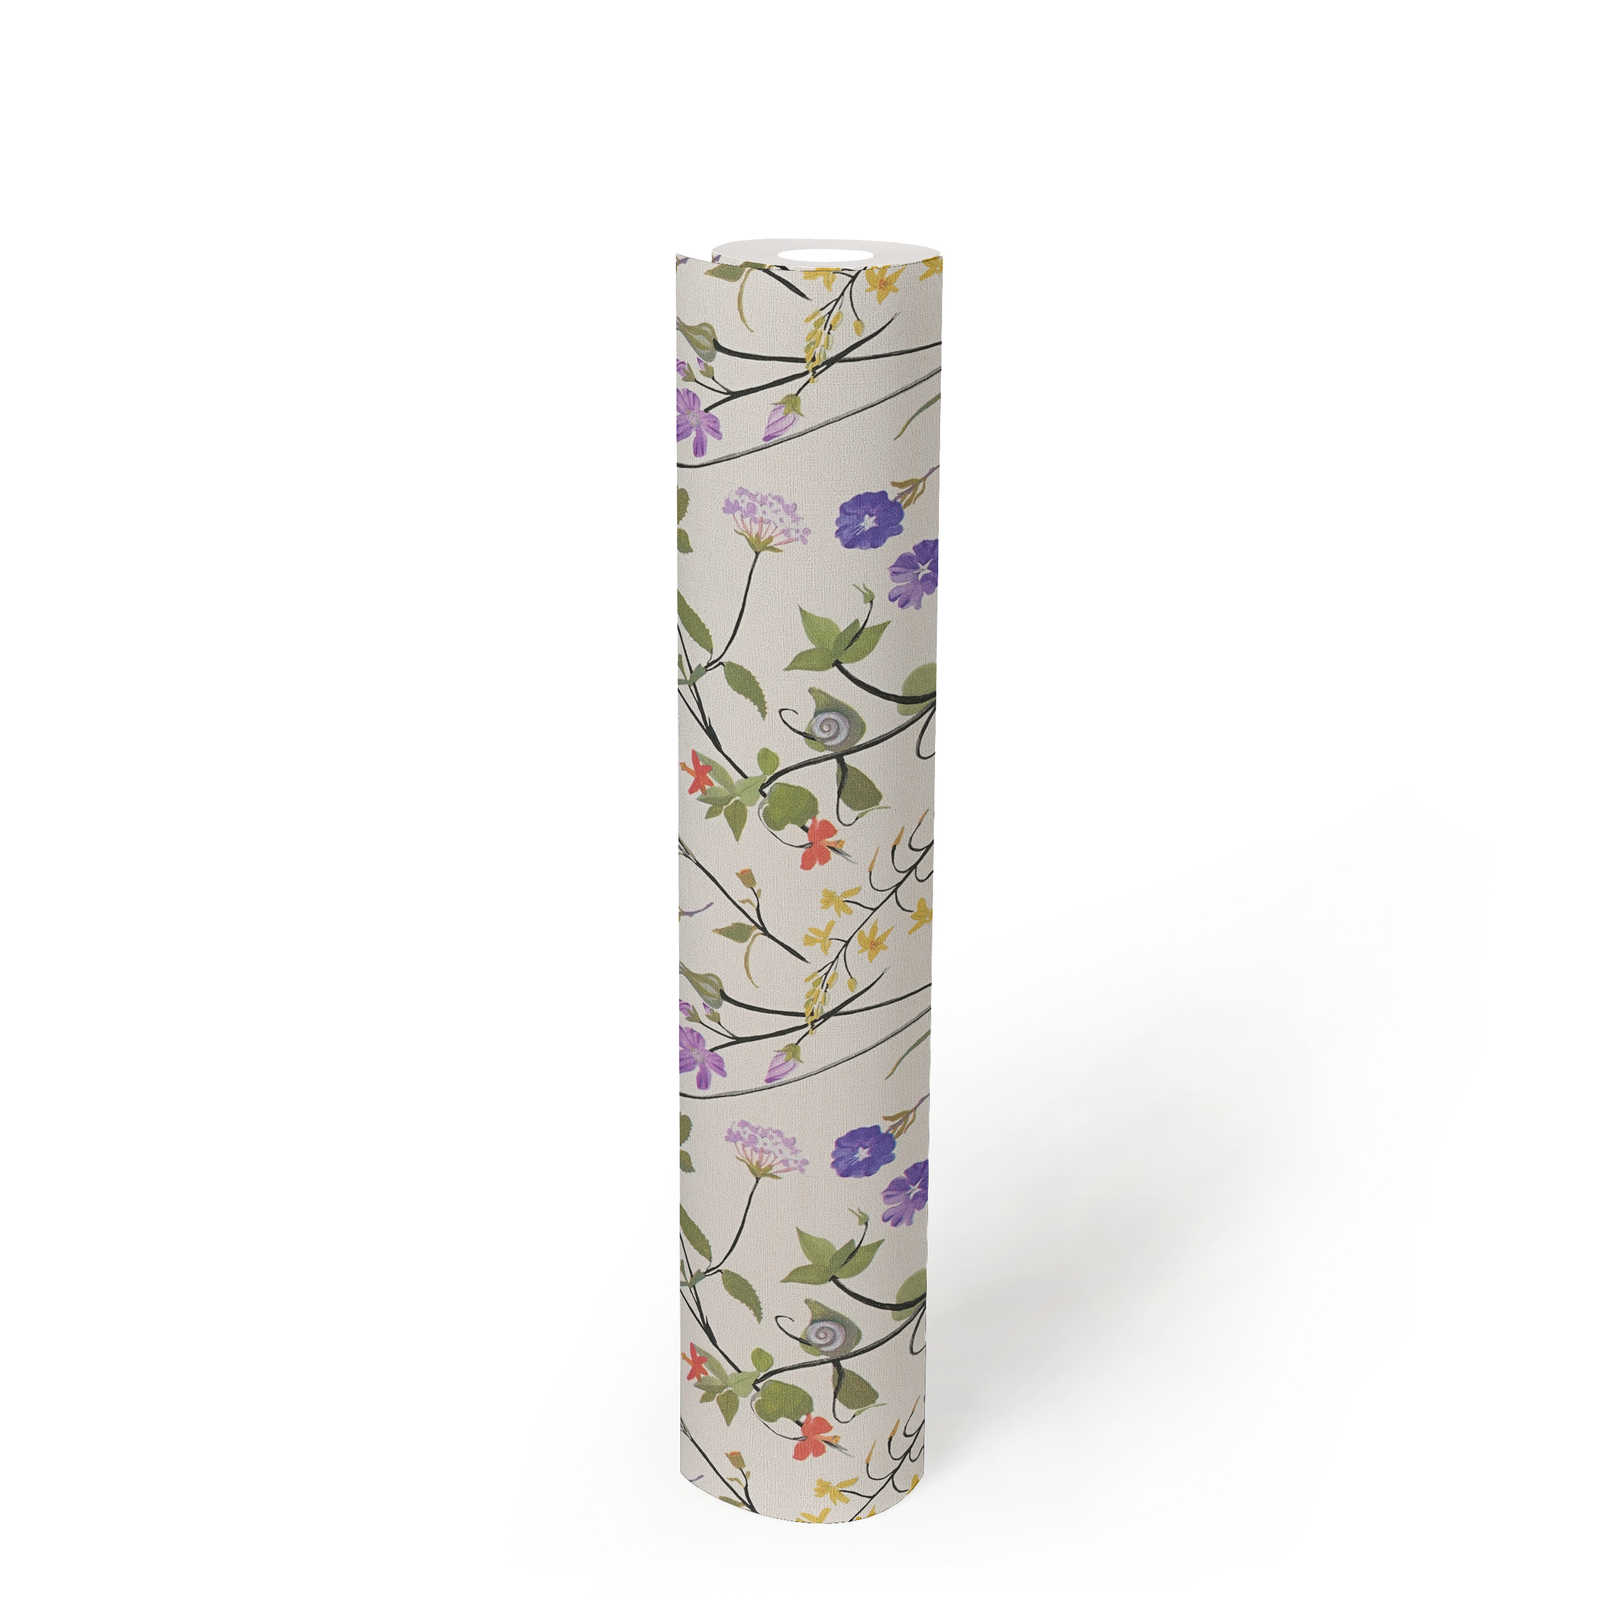             Floral wallpaper with detailed floral pattern - cream, green, colourful
        